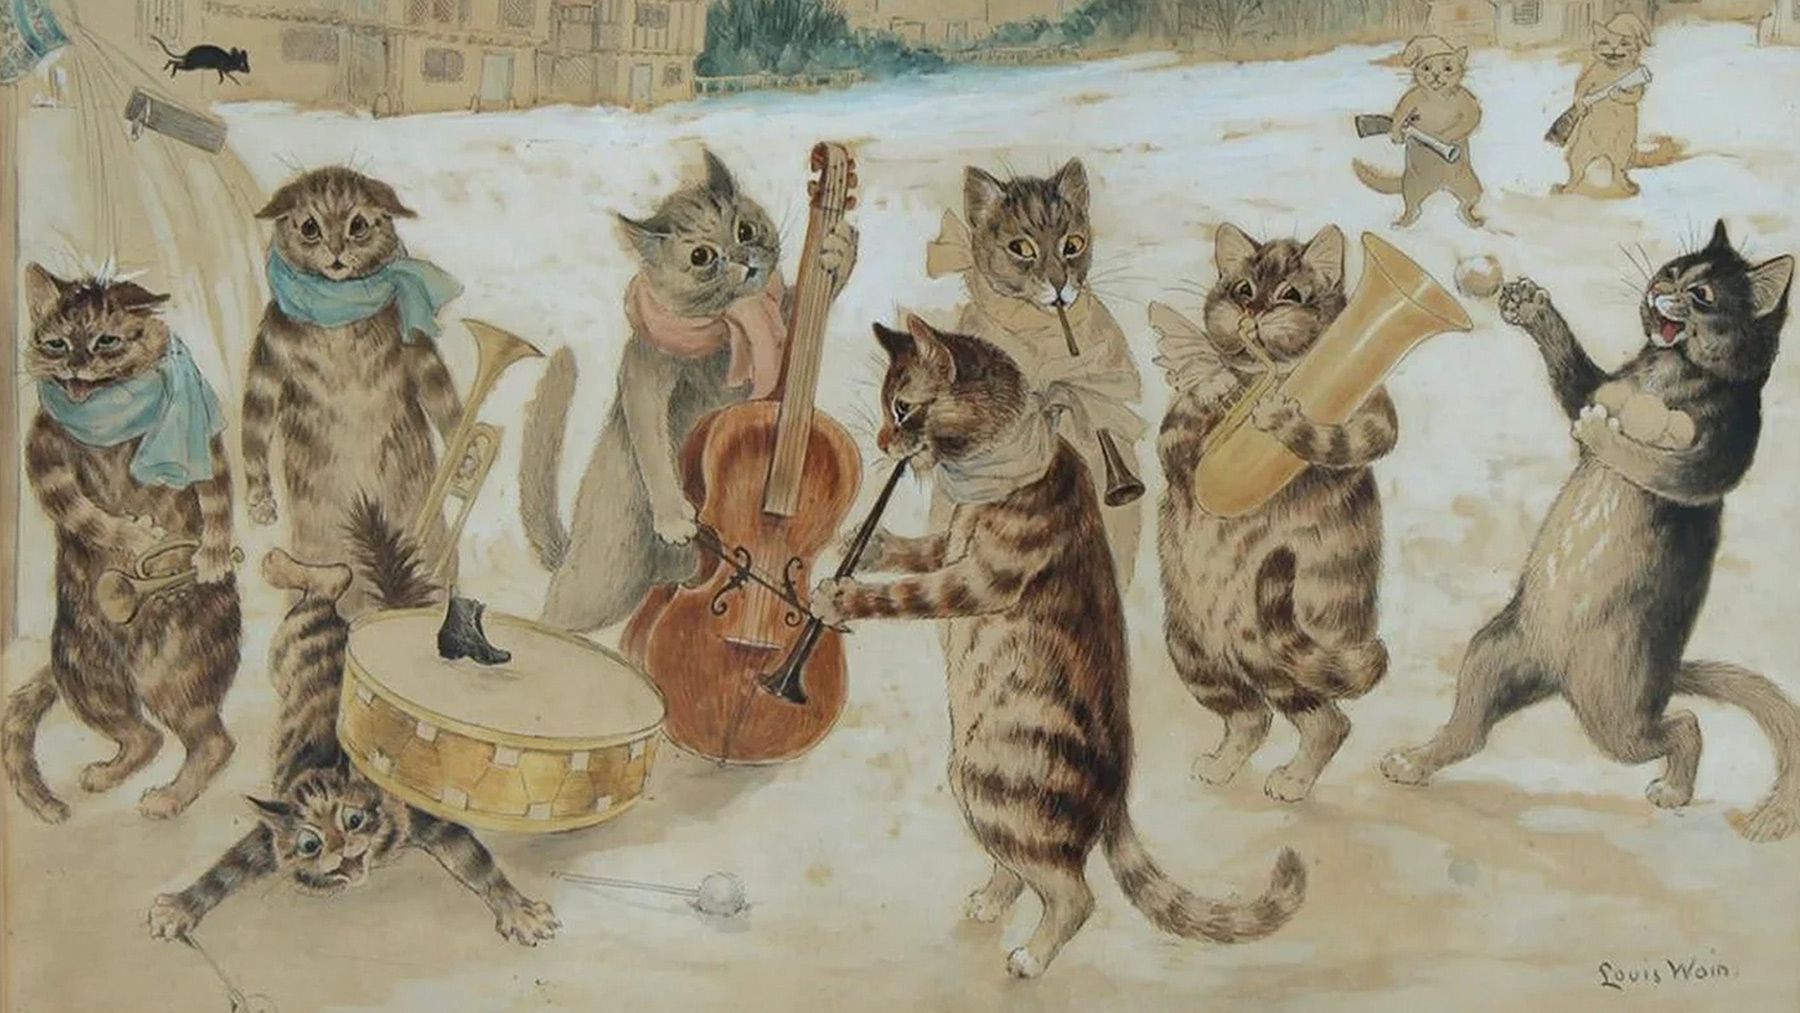 Illustration of cats playing musical instruments in the snow, by Louis Wain